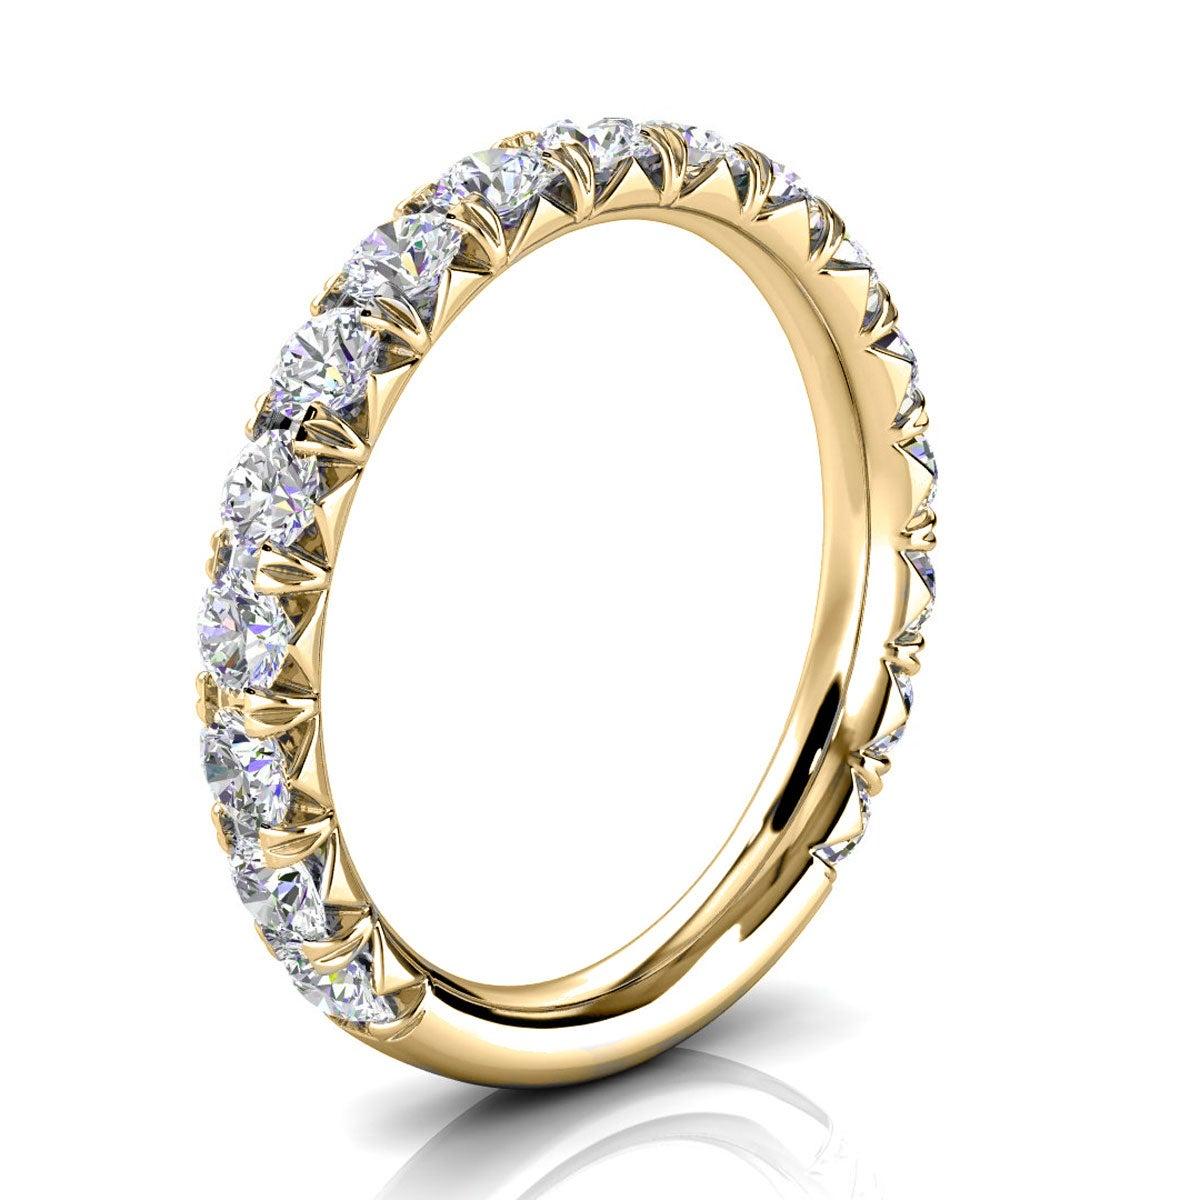 For Sale:  14k Yellow Gold GIA French Pave Diamond Ring '1 Ct. Tw' 2